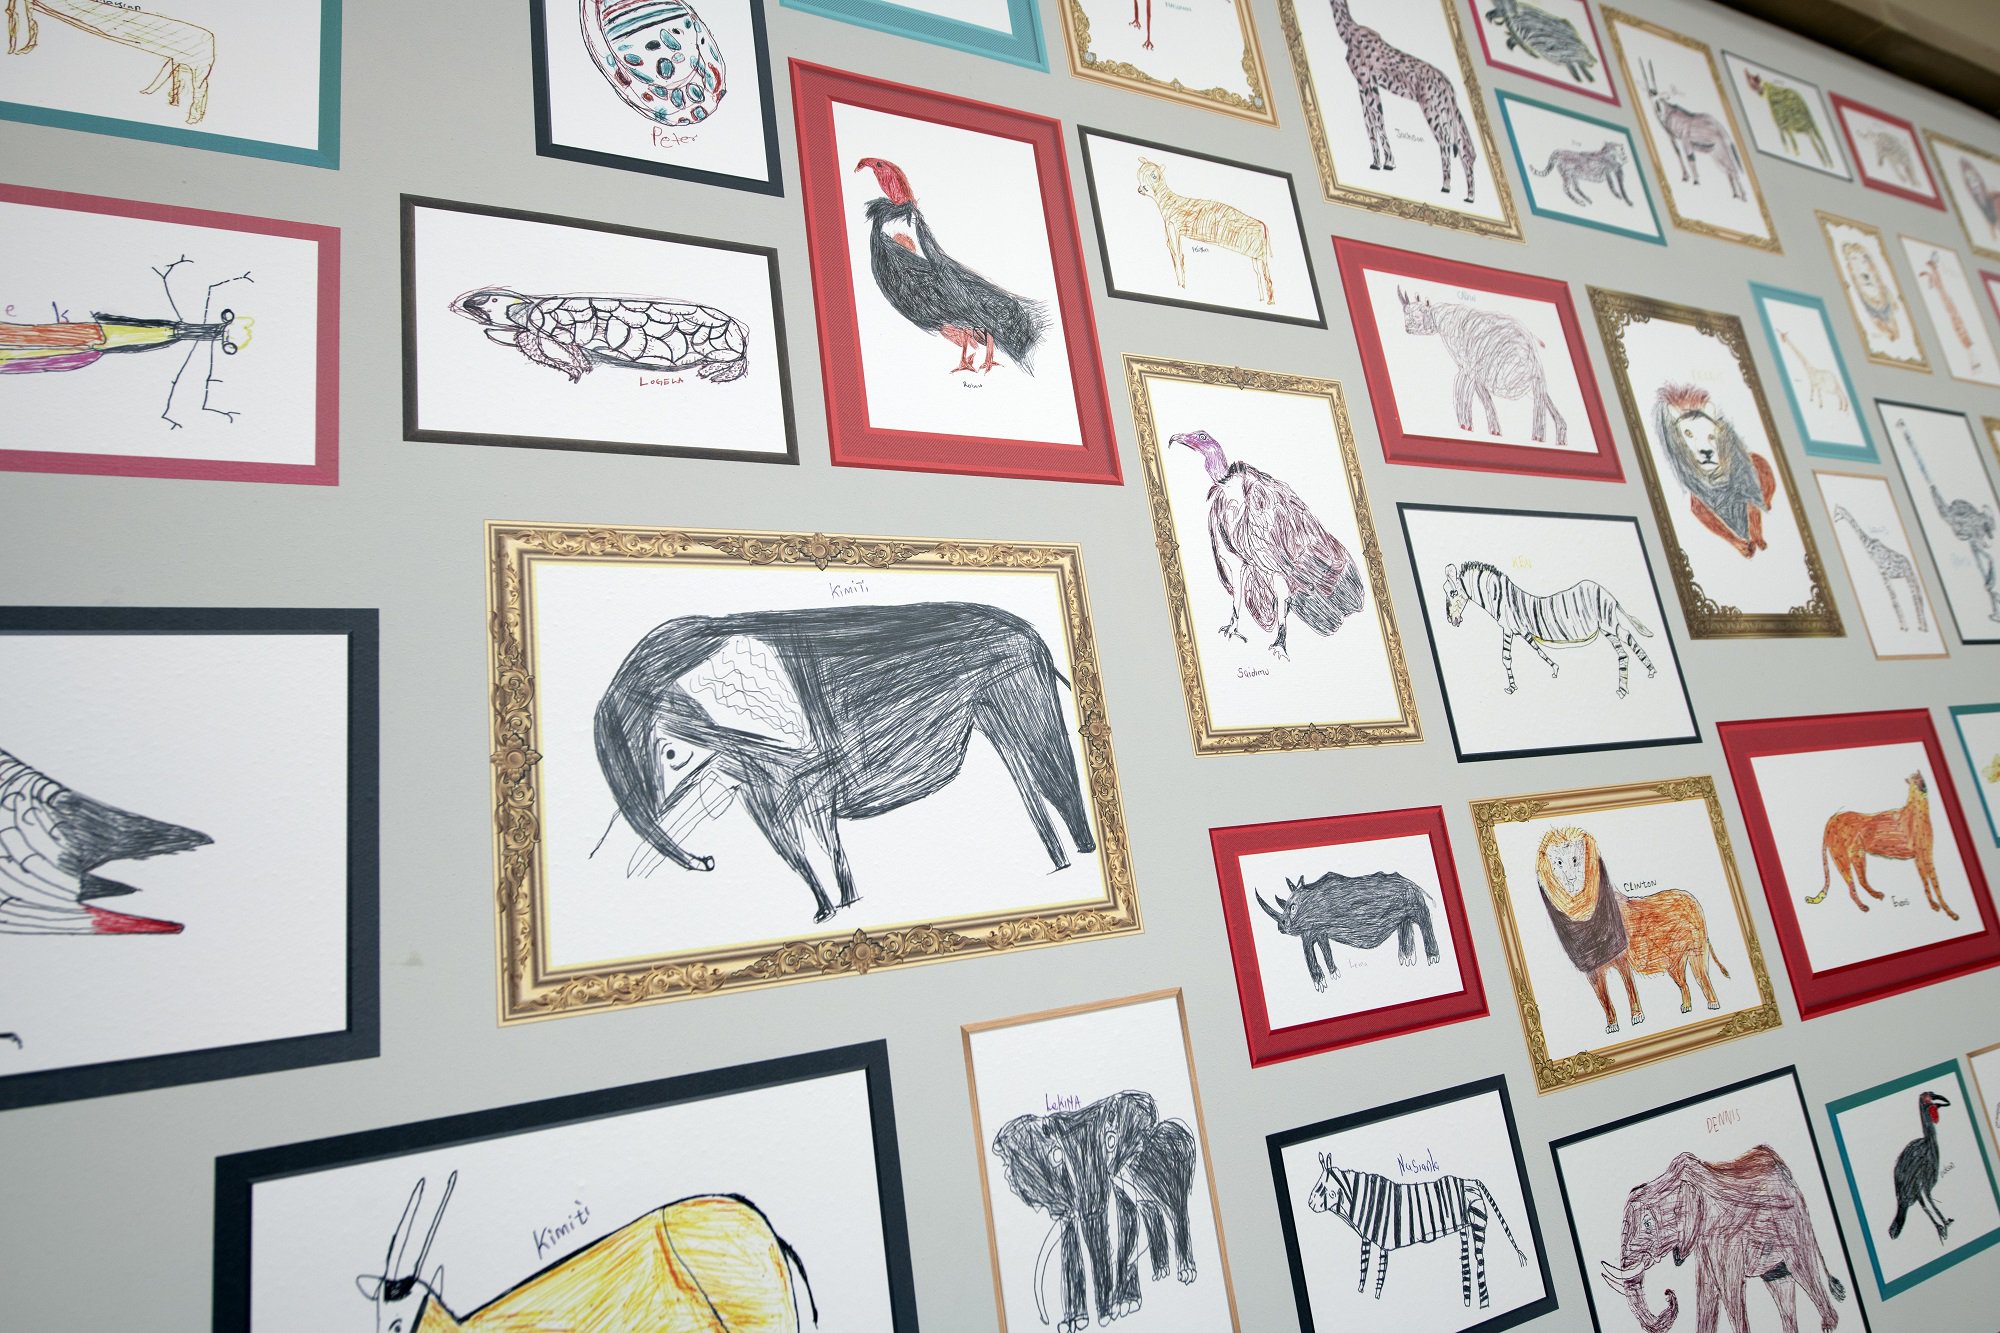 Children's biro drawings of endangered animals on display in a museum exhibition.